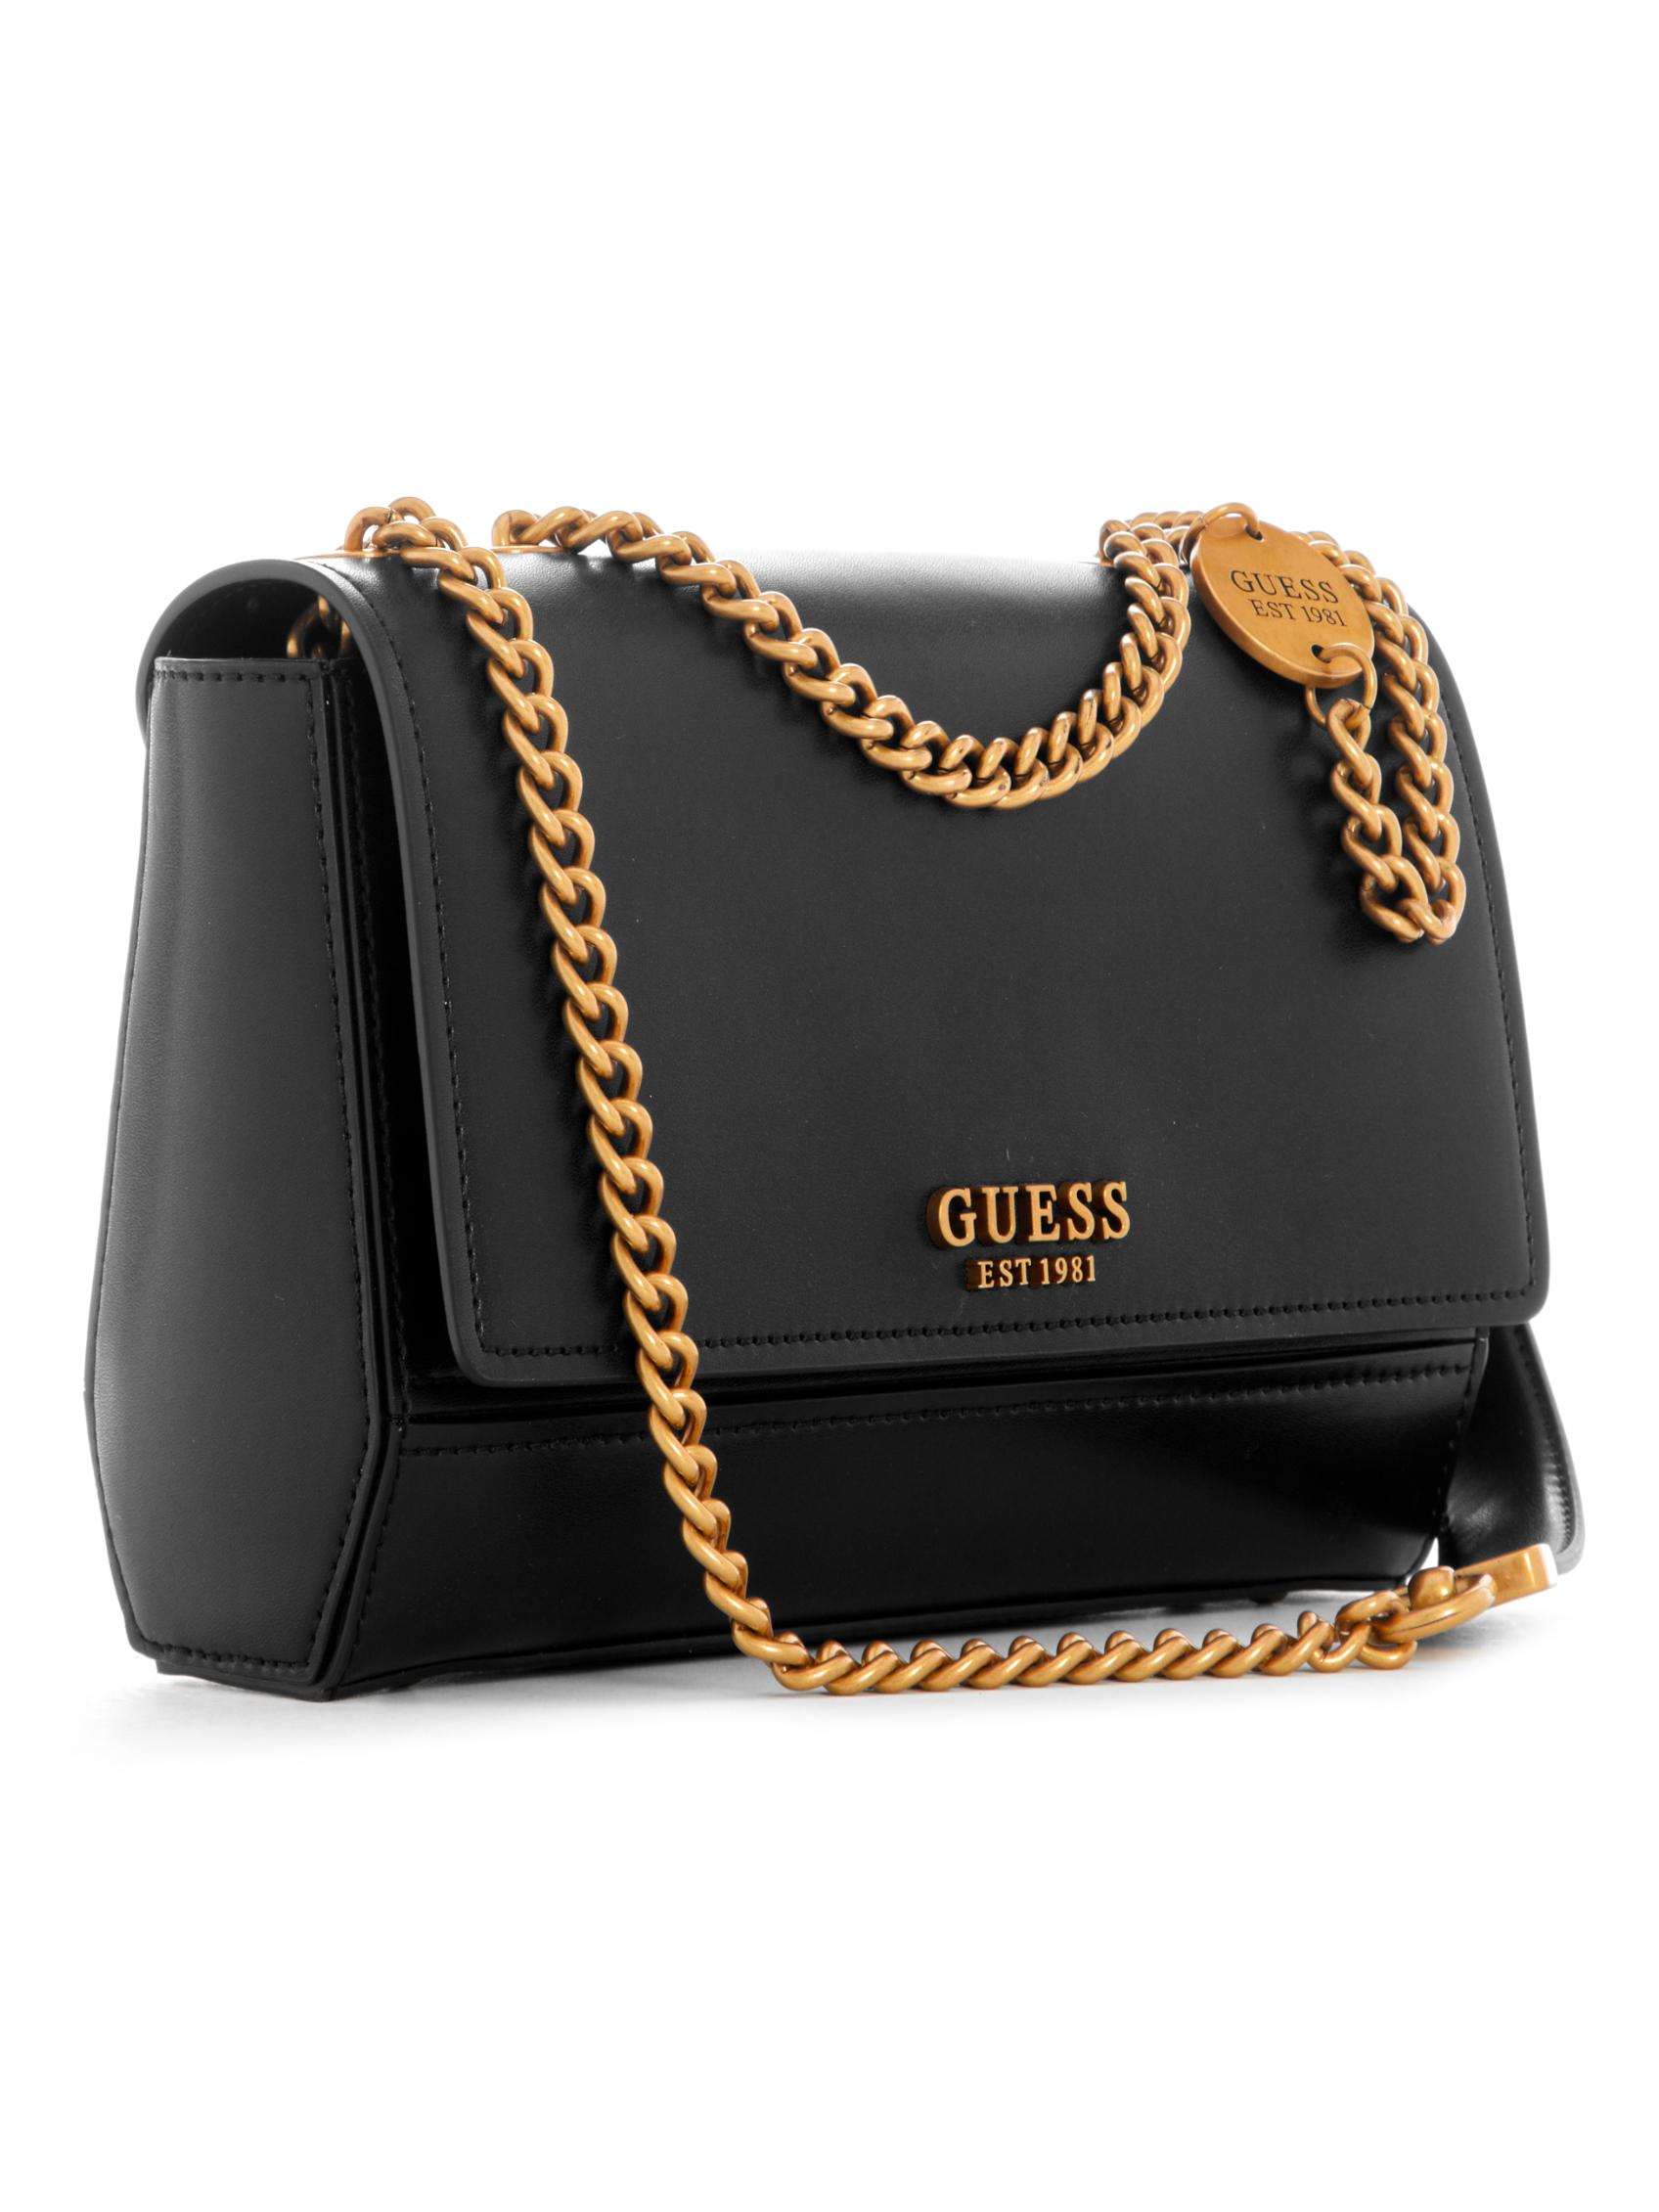 ISELINE CONVERTIBLE CROSSBODY FLAP | Guess Philippines